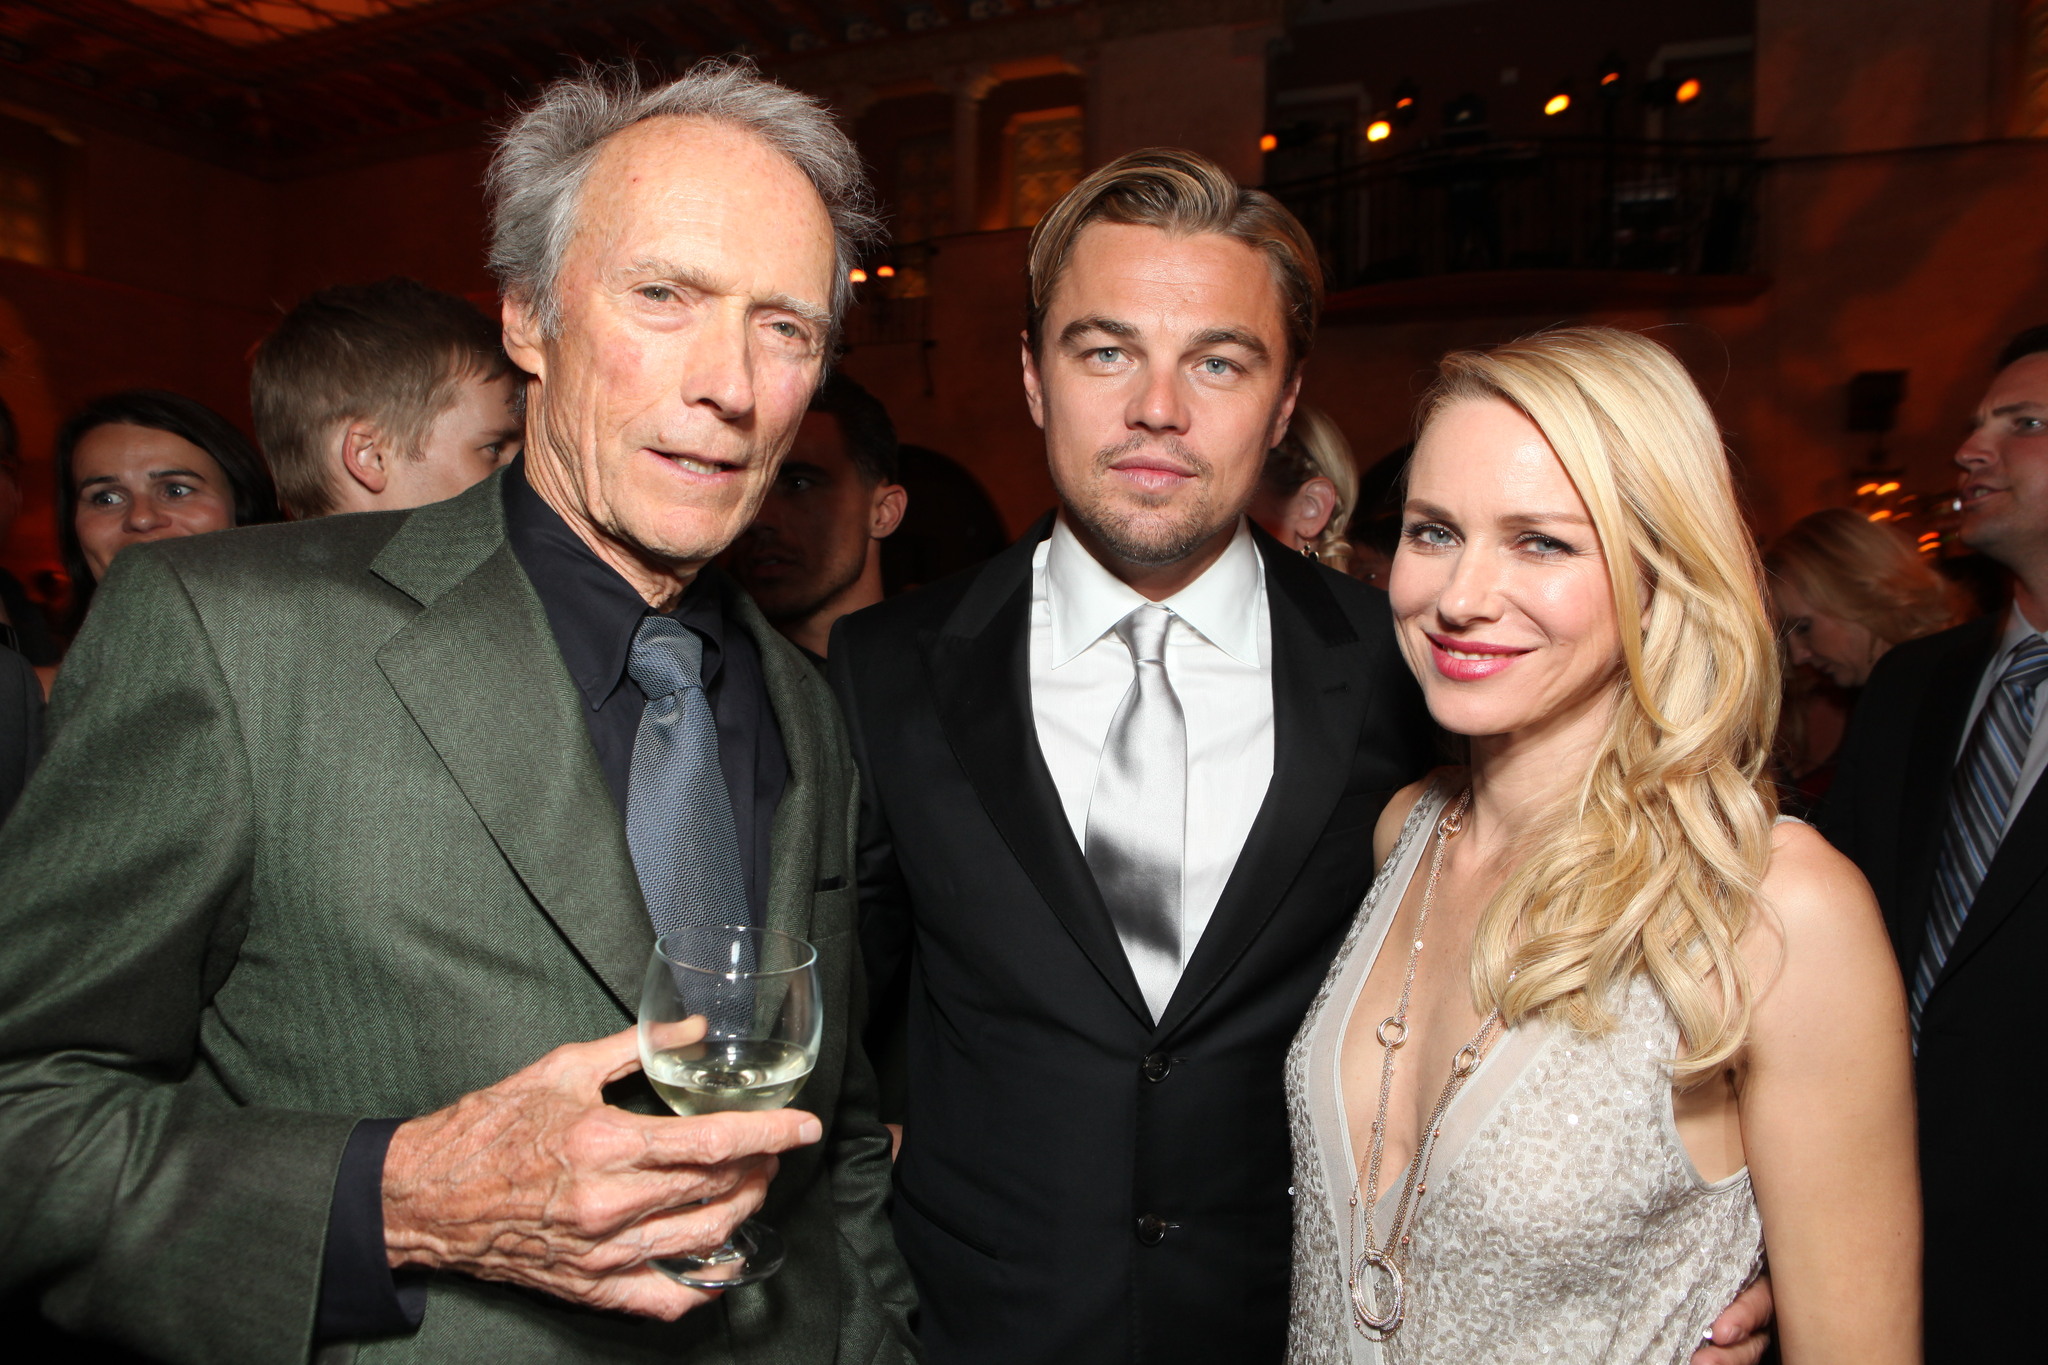 Leonardo DiCaprio, Clint Eastwood and Naomi Watts at event of J. Edgar (2011)